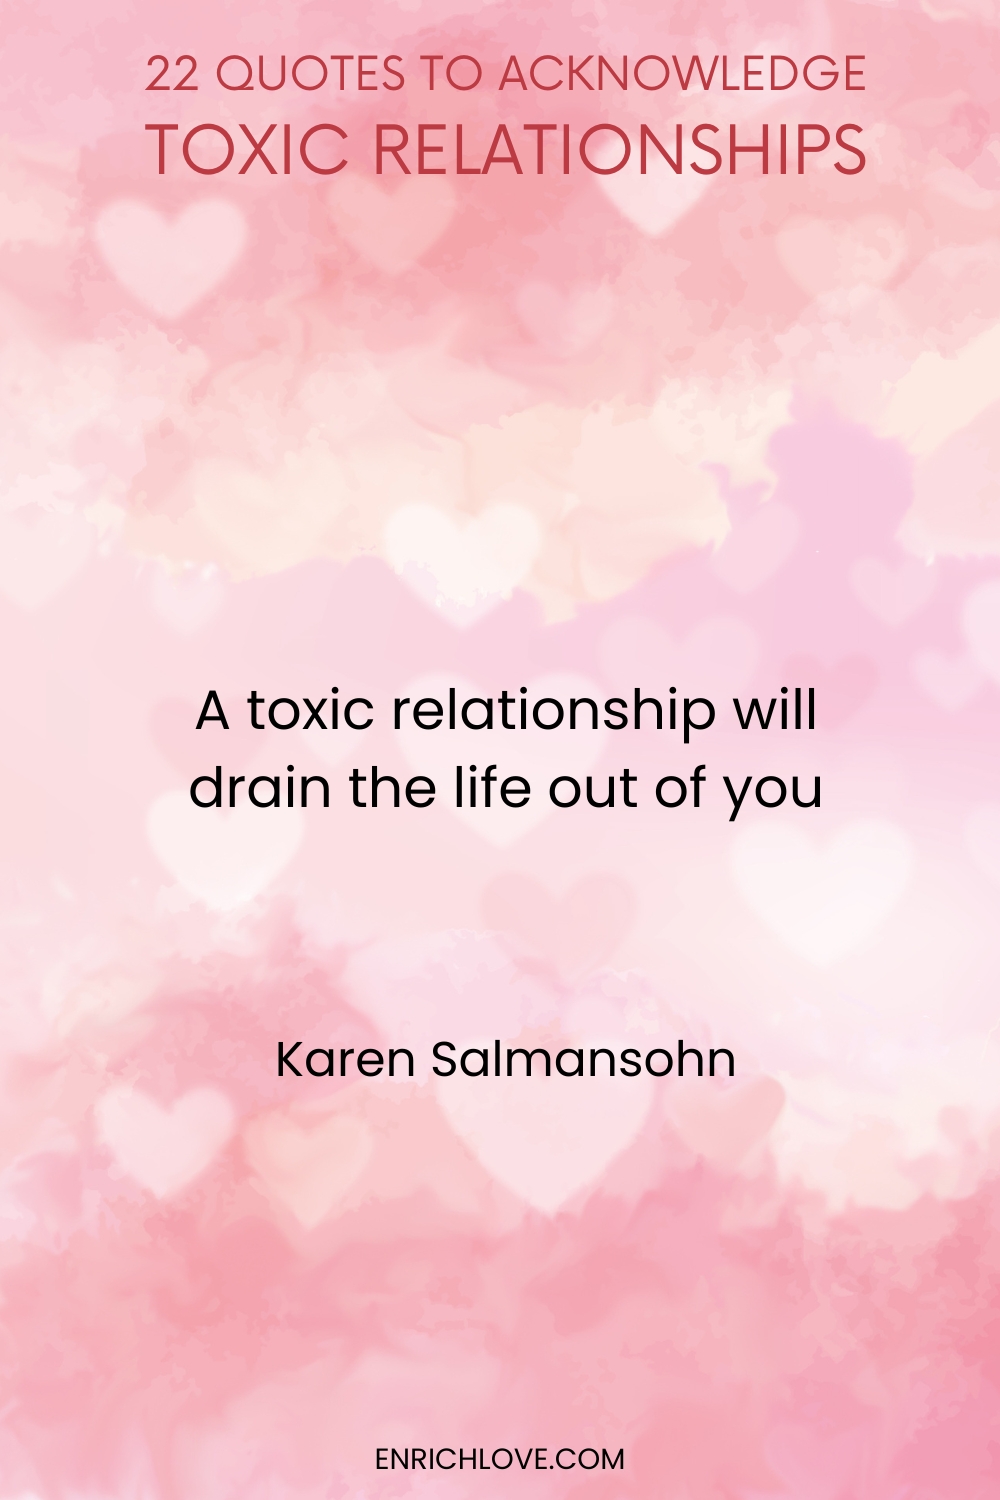 22 Quotes to Acknowledge Toxic Relationships -A toxic relationship will drain the life out of you by Karen Salmansohn